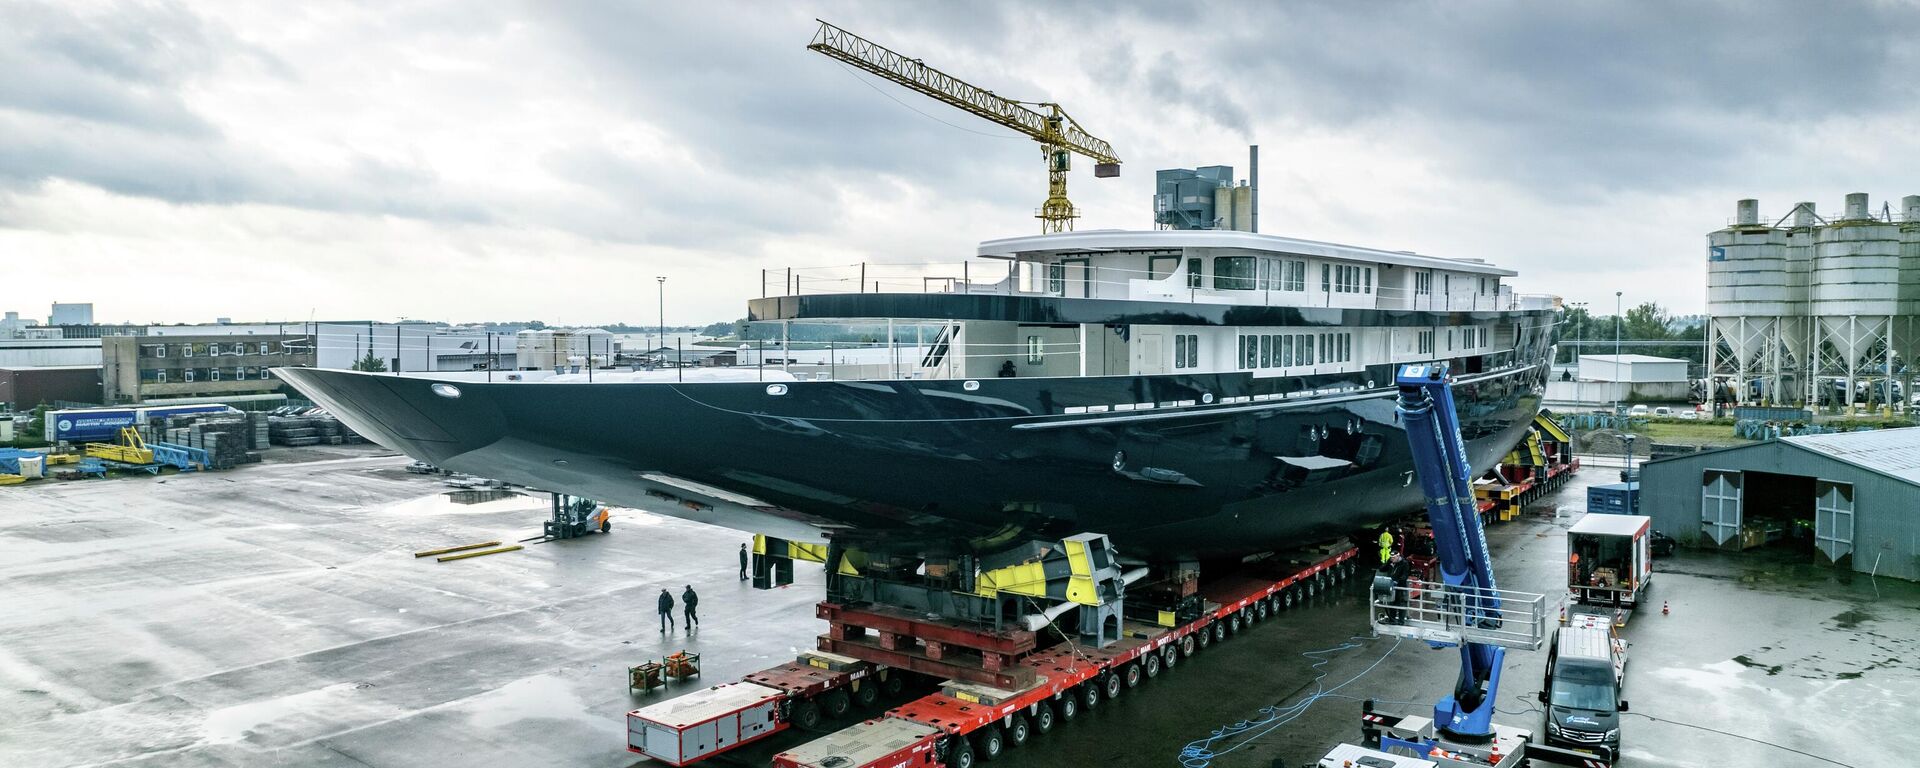 View of a yacht, reportedly being built for Amazon founder Jeff Bezos, on the wharf in Zwijndrecht, near Rotterdam, Netherlands, Wednesday, Oct. 21, 2021. A plan to dismantle a historic bridge in the heart of Dutch port city Rotterdam so that the huge yacht can get to the North Sea is unlikely to be plain sailing. Reports this week that the city had already agreed to take apart the recently restored Koningshaven Bridge, known locally as De Hef sparked anger in the city, with one Facebook group set up calling for people to pelt the multimillion dollar yacht with rotten eggs. - Sputnik International, 1920, 03.08.2022